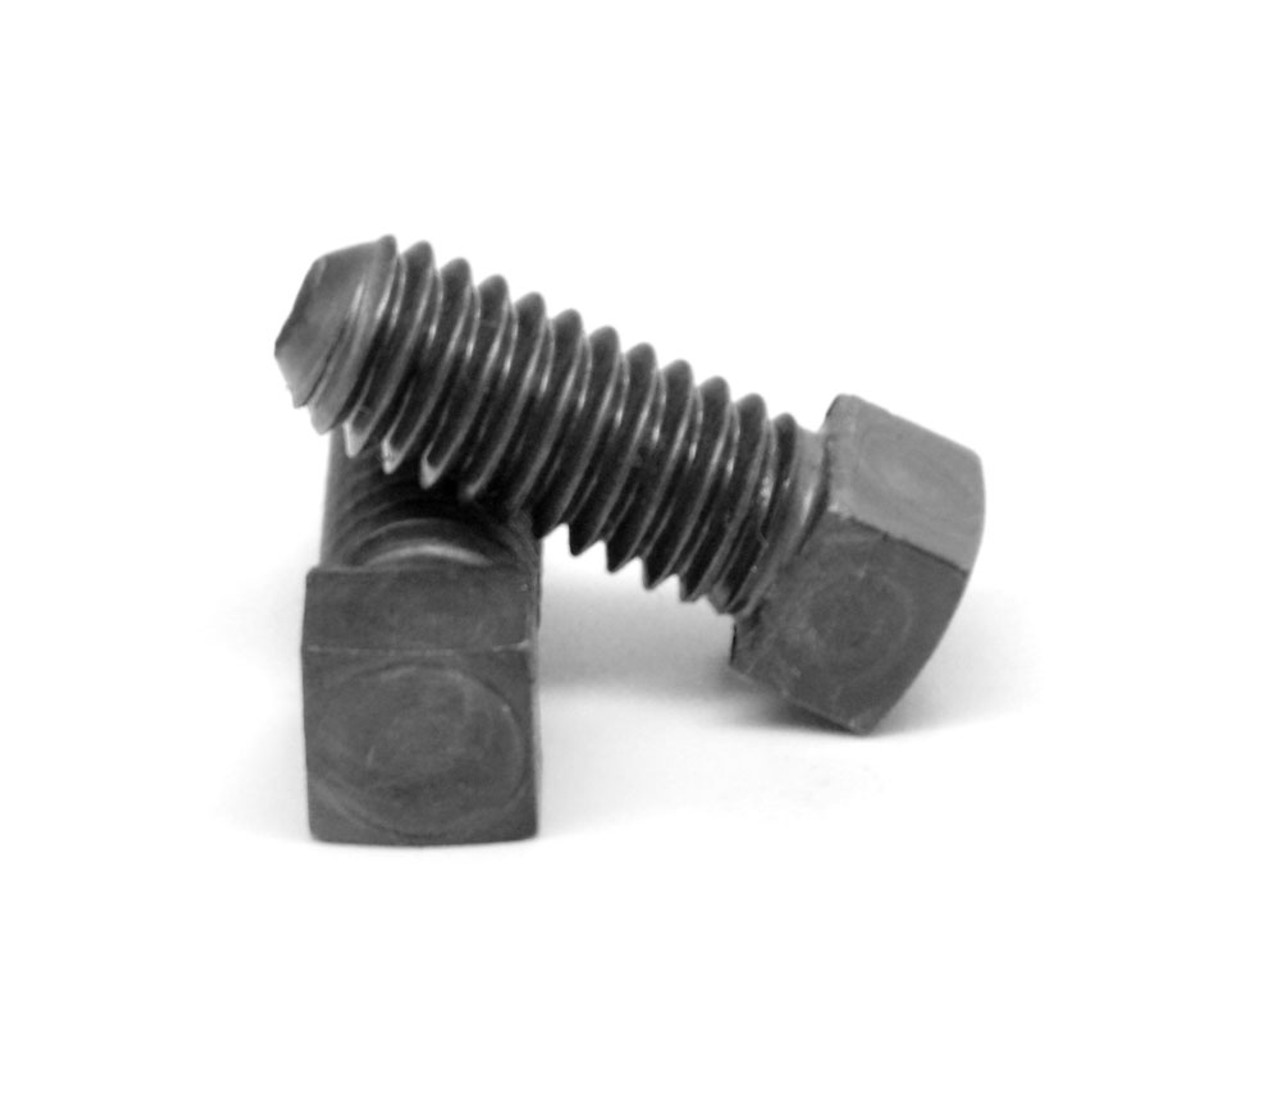 5/16"-18 x 2 1/2" (FT) Coarse Thread Square Head Set Screw Cup Point Low Carbon Steel Case Hardened Plain Finish